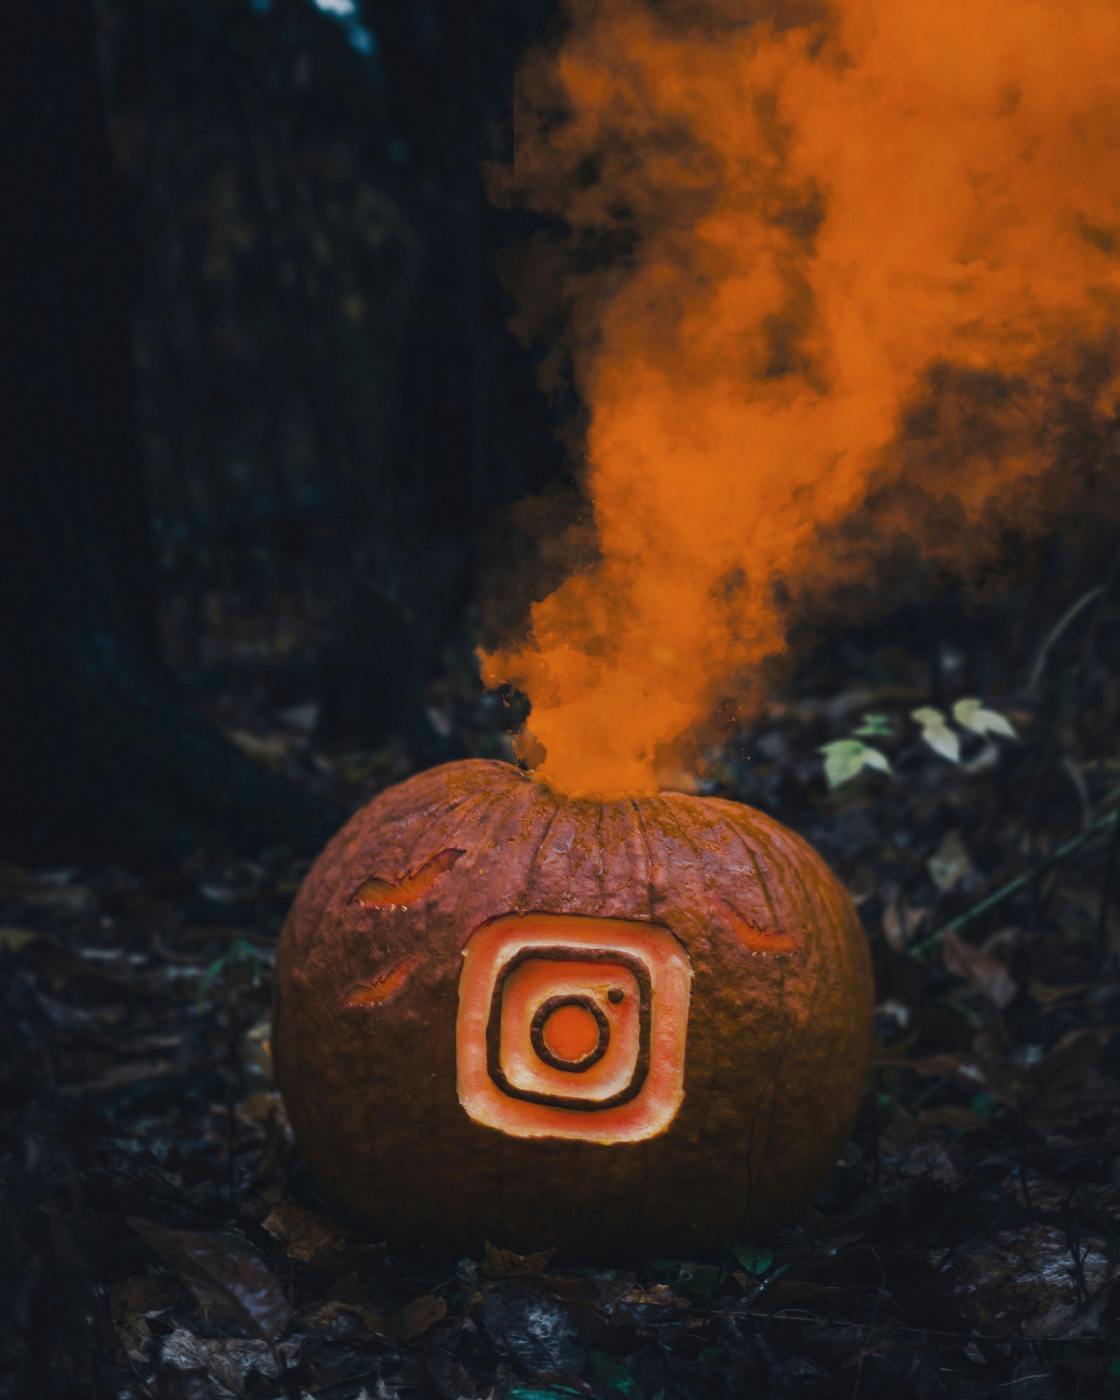 A pumpkin with the Instagram icon carved in it and orange smoke coming out 